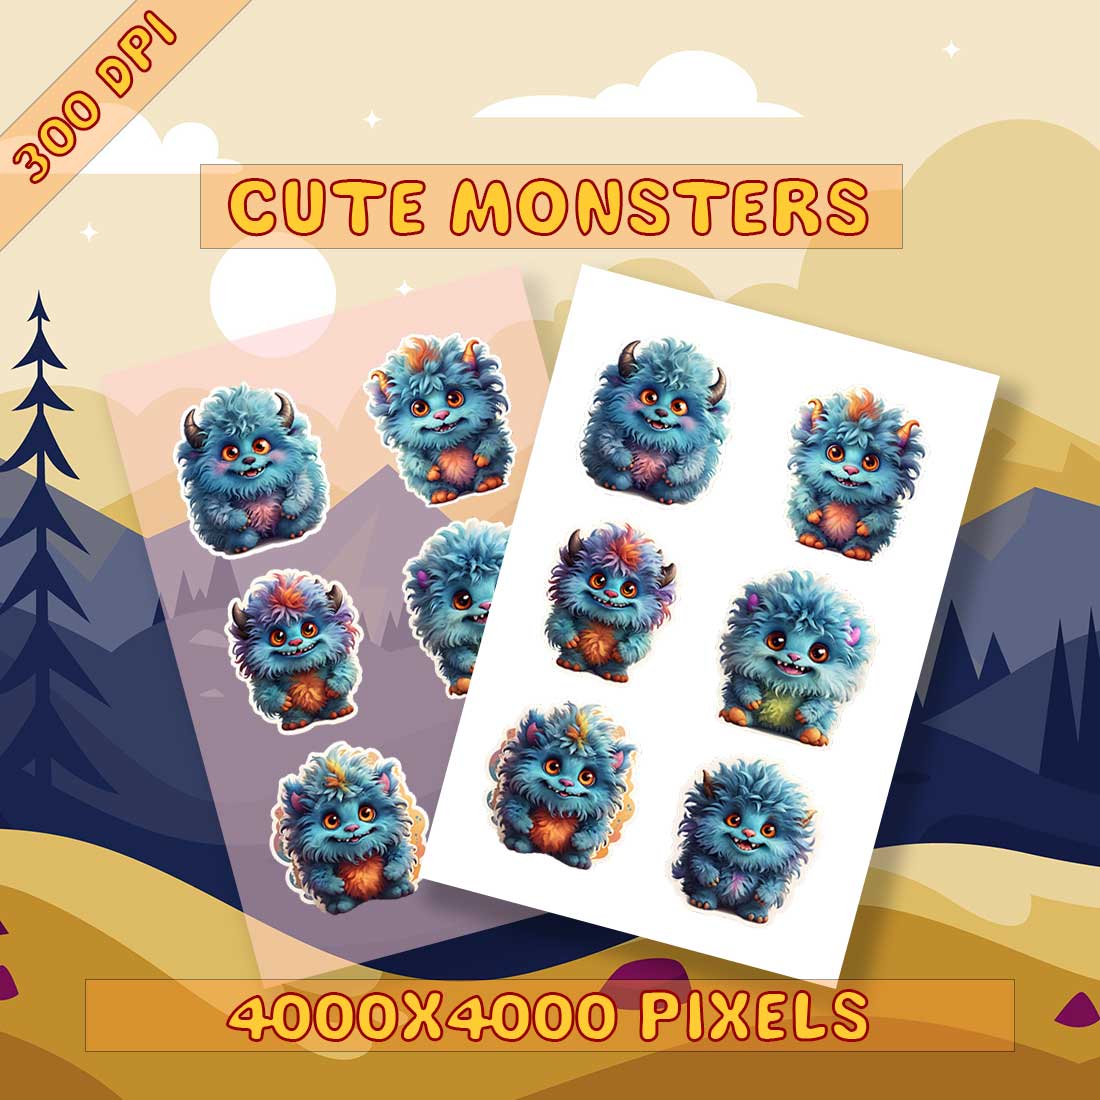 Black Monsters Cute Stickers cover image.